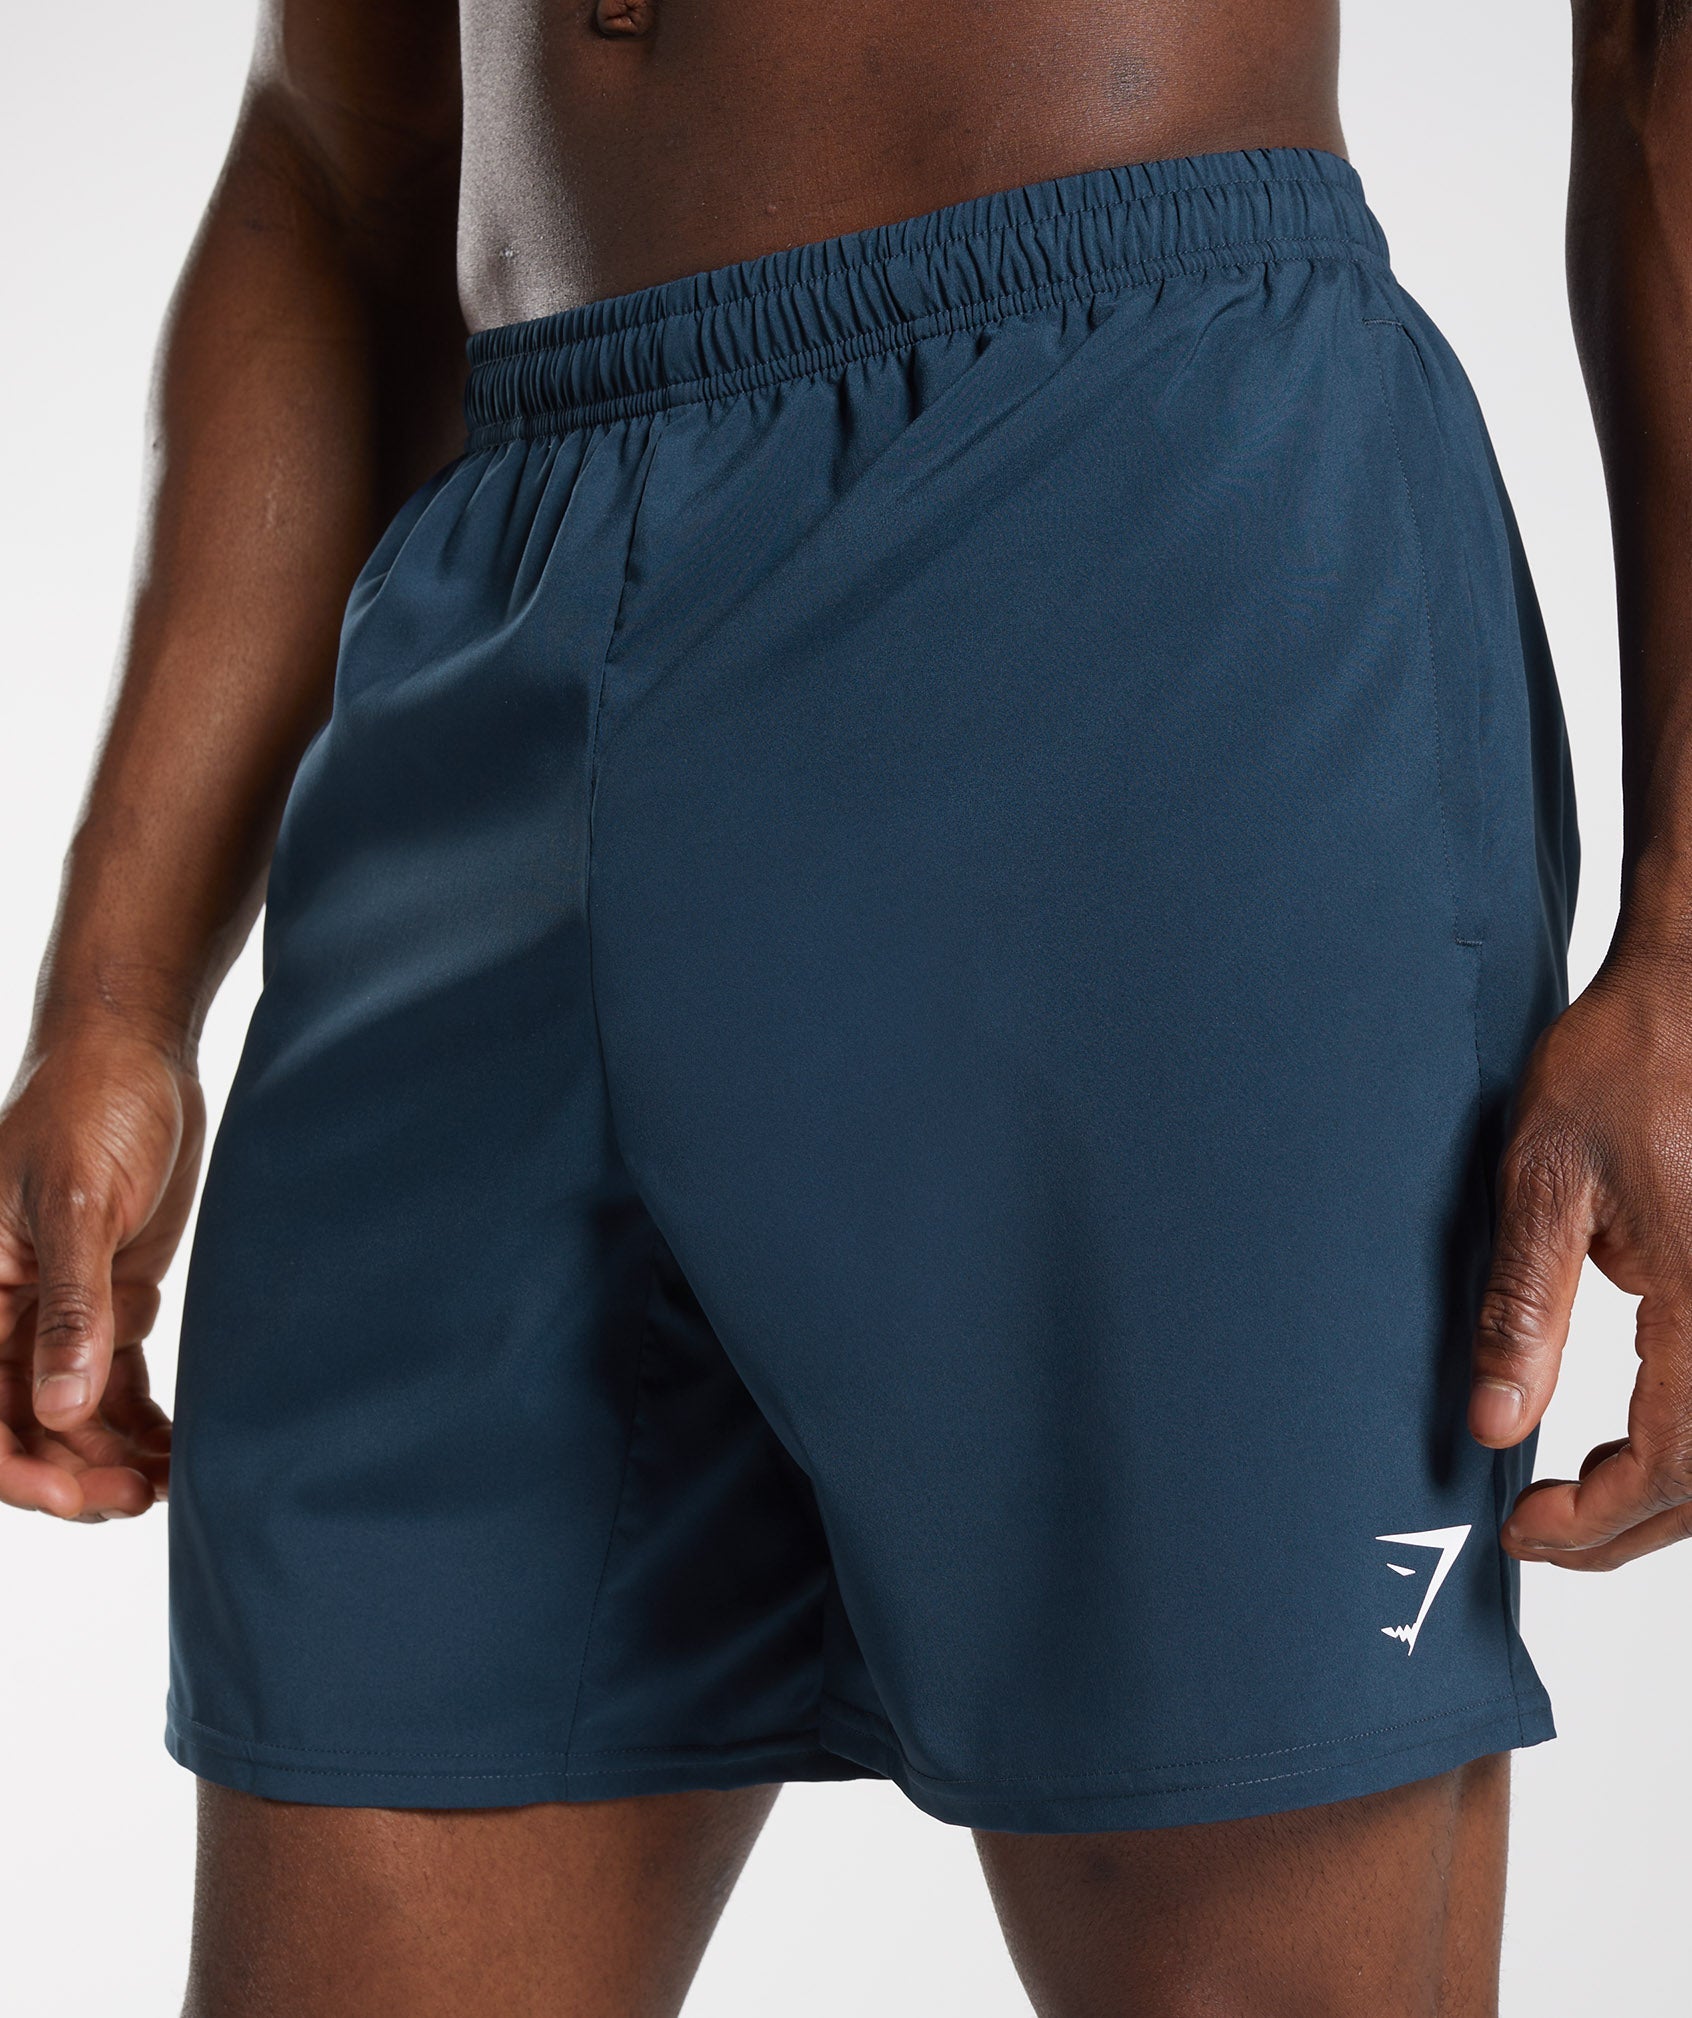 Arrival Shorts in Navy